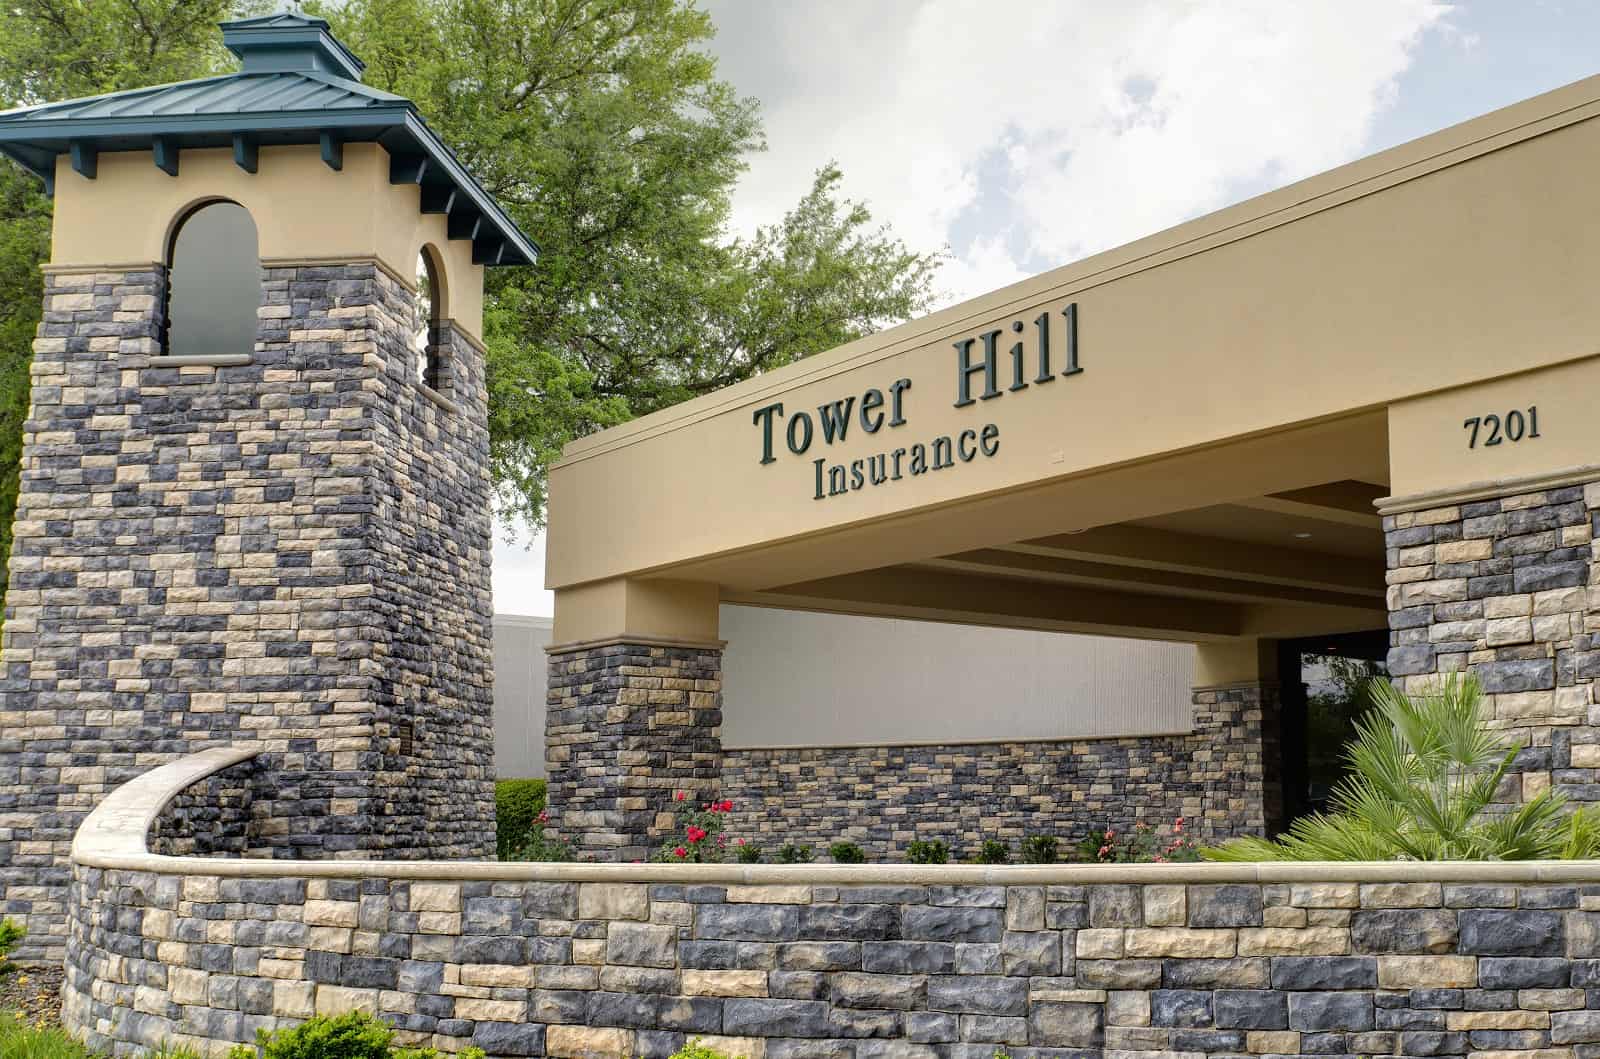 Tower Hill Insurance corporate headquarters